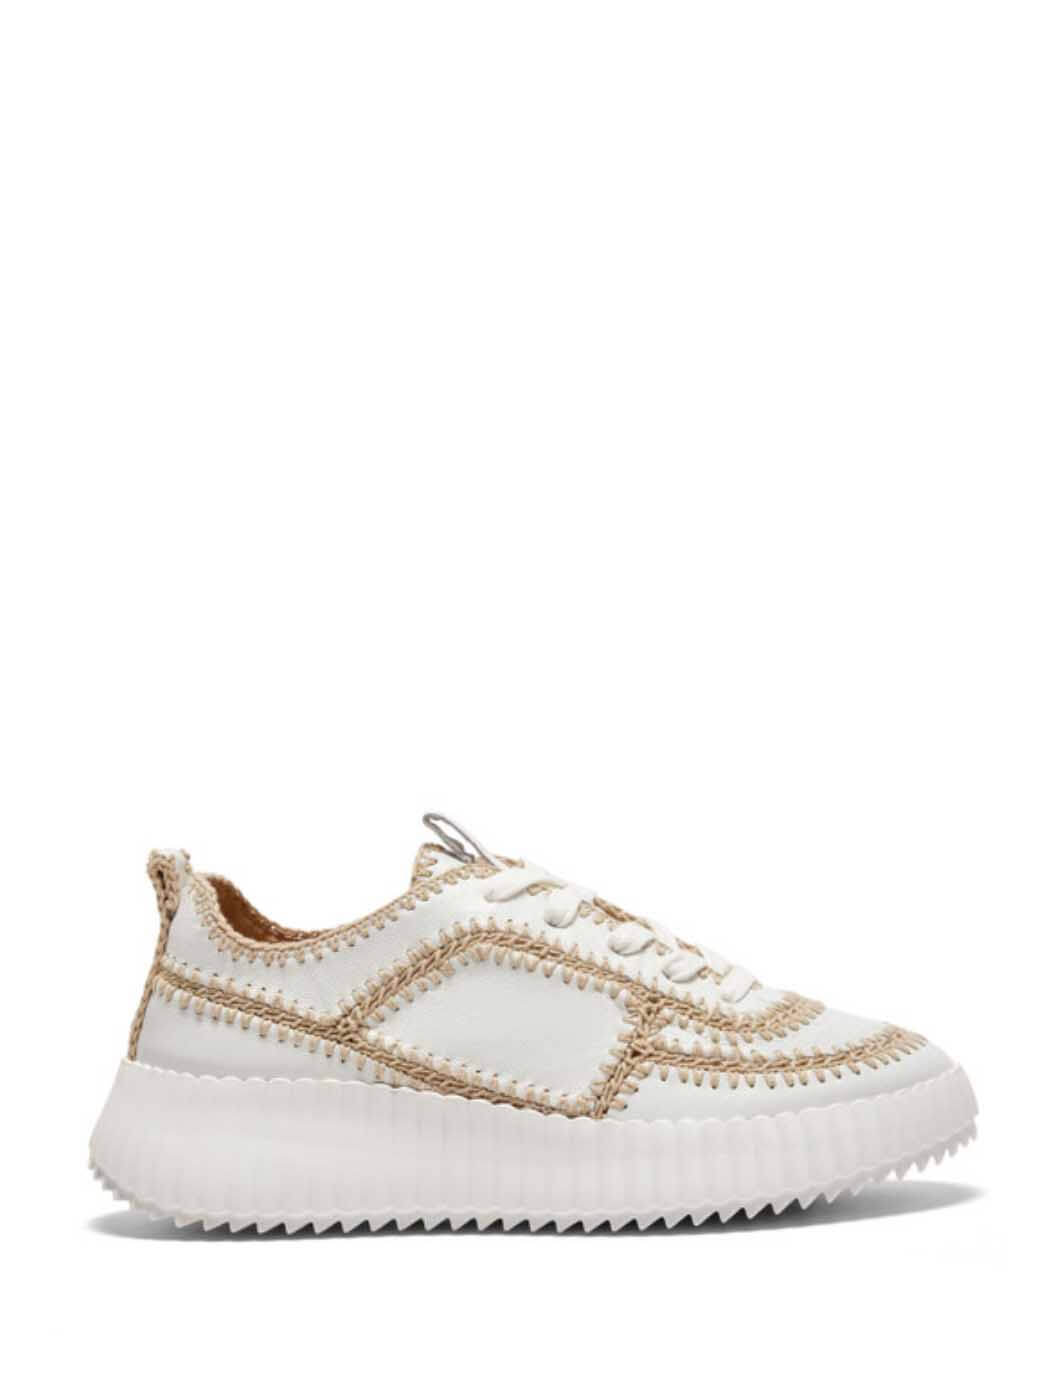 Silent D Carrie Sneaker in White Leather